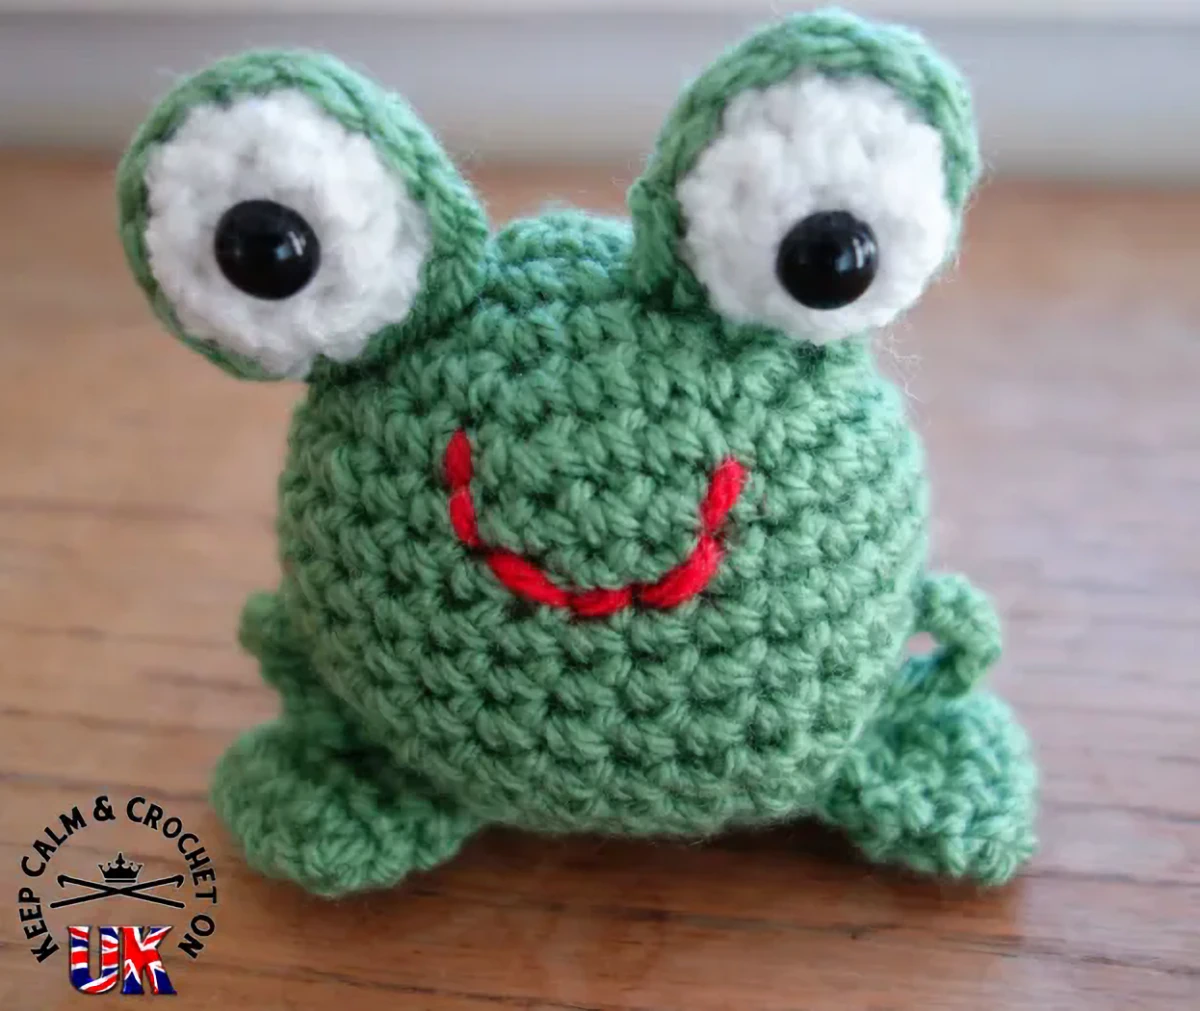 Crocheted frog toy.